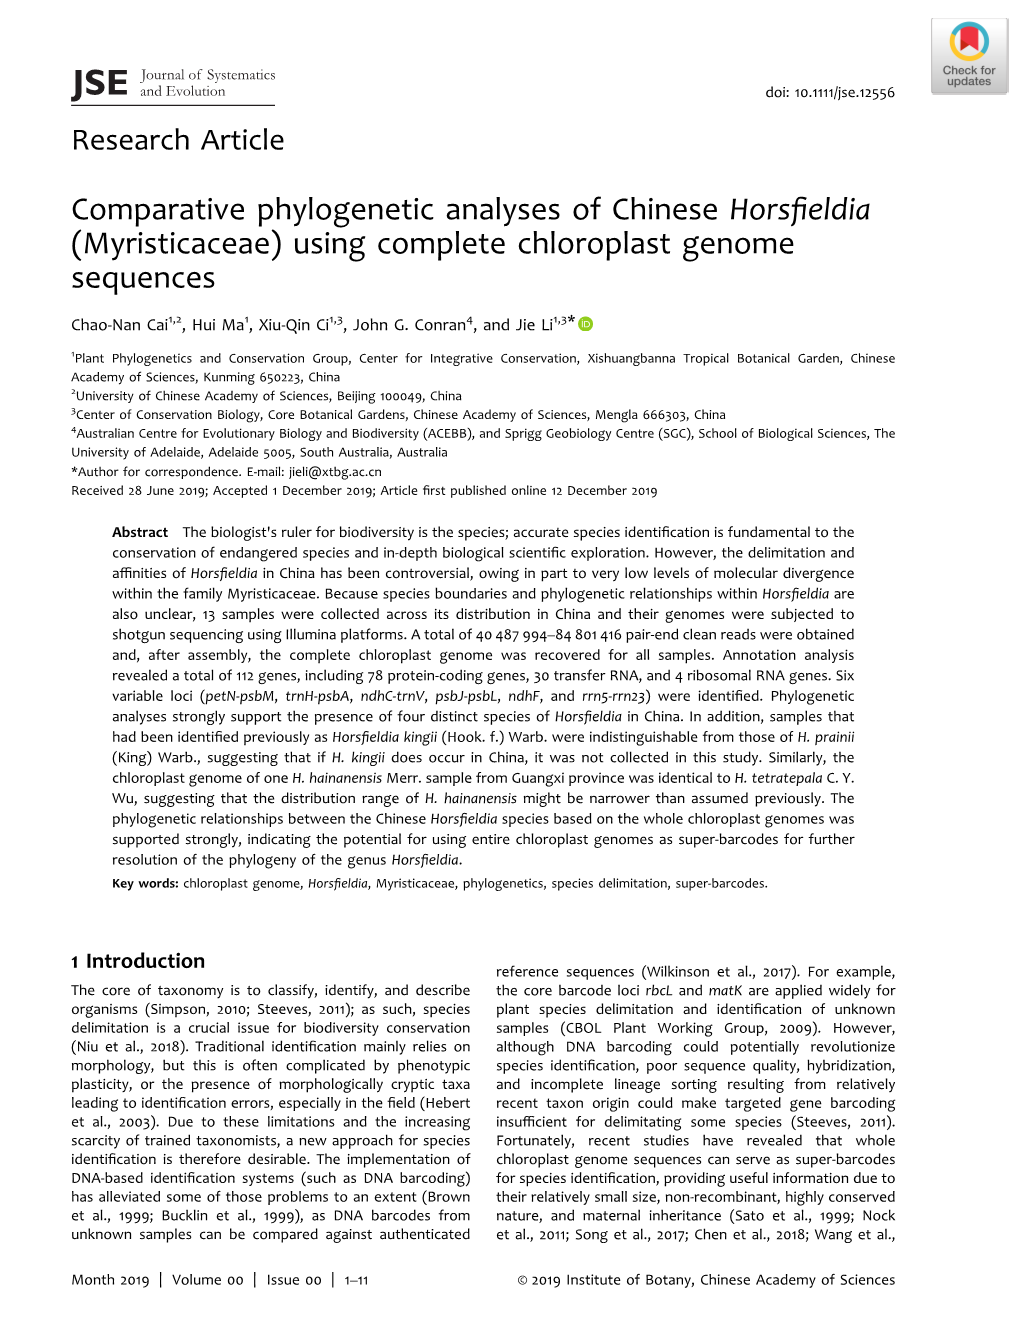 Comparative Phylogenetic Analyses of Chinese Horsfieldia (Myristicaceae